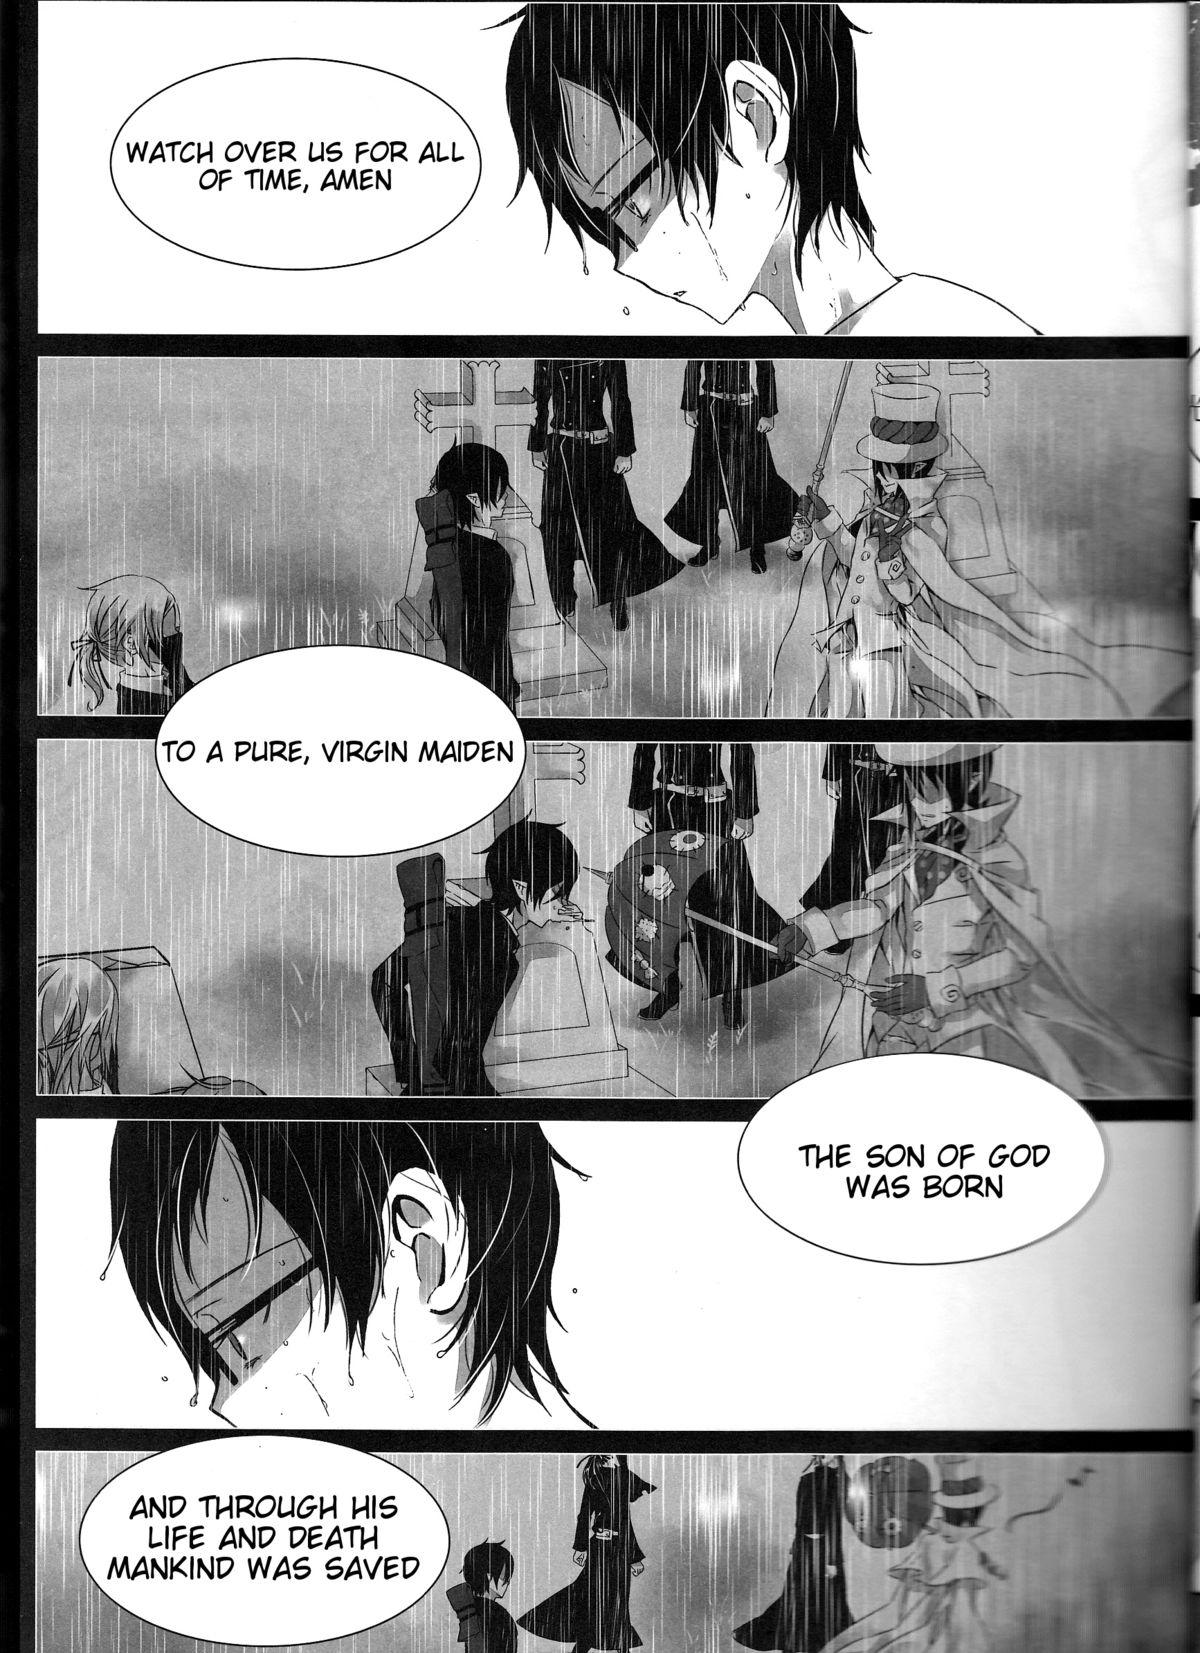 Reverse Cowgirl Exodus 2 - Ao no exorcist Threesome - Page 8